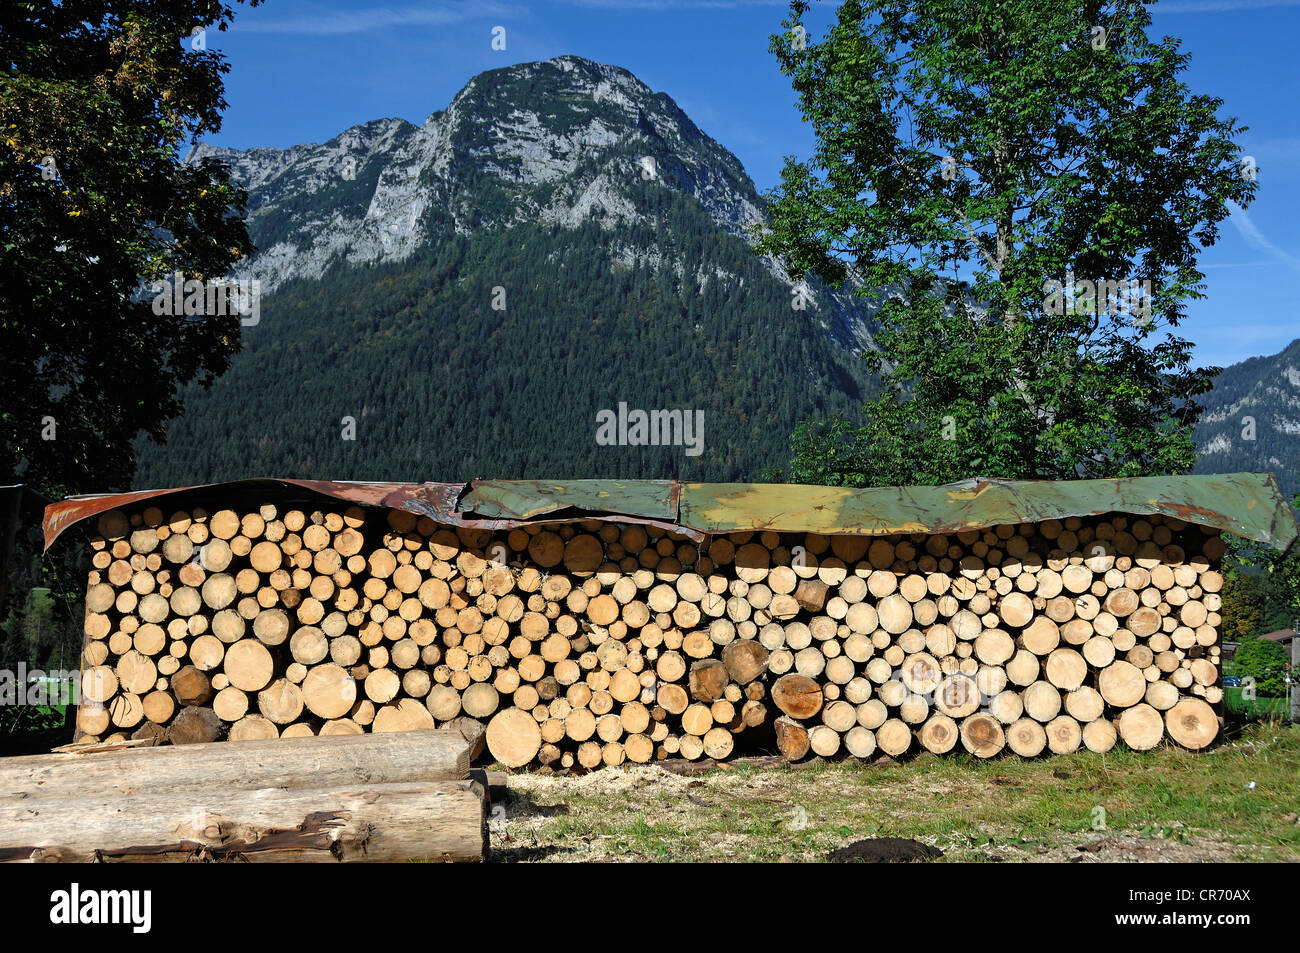 Sawn logs, 1 metre, covered and stacked, Mt Reiteralpe at back, Ramsau, Upper Bavaria, Bavaria, Germany, Europe Stock Photo